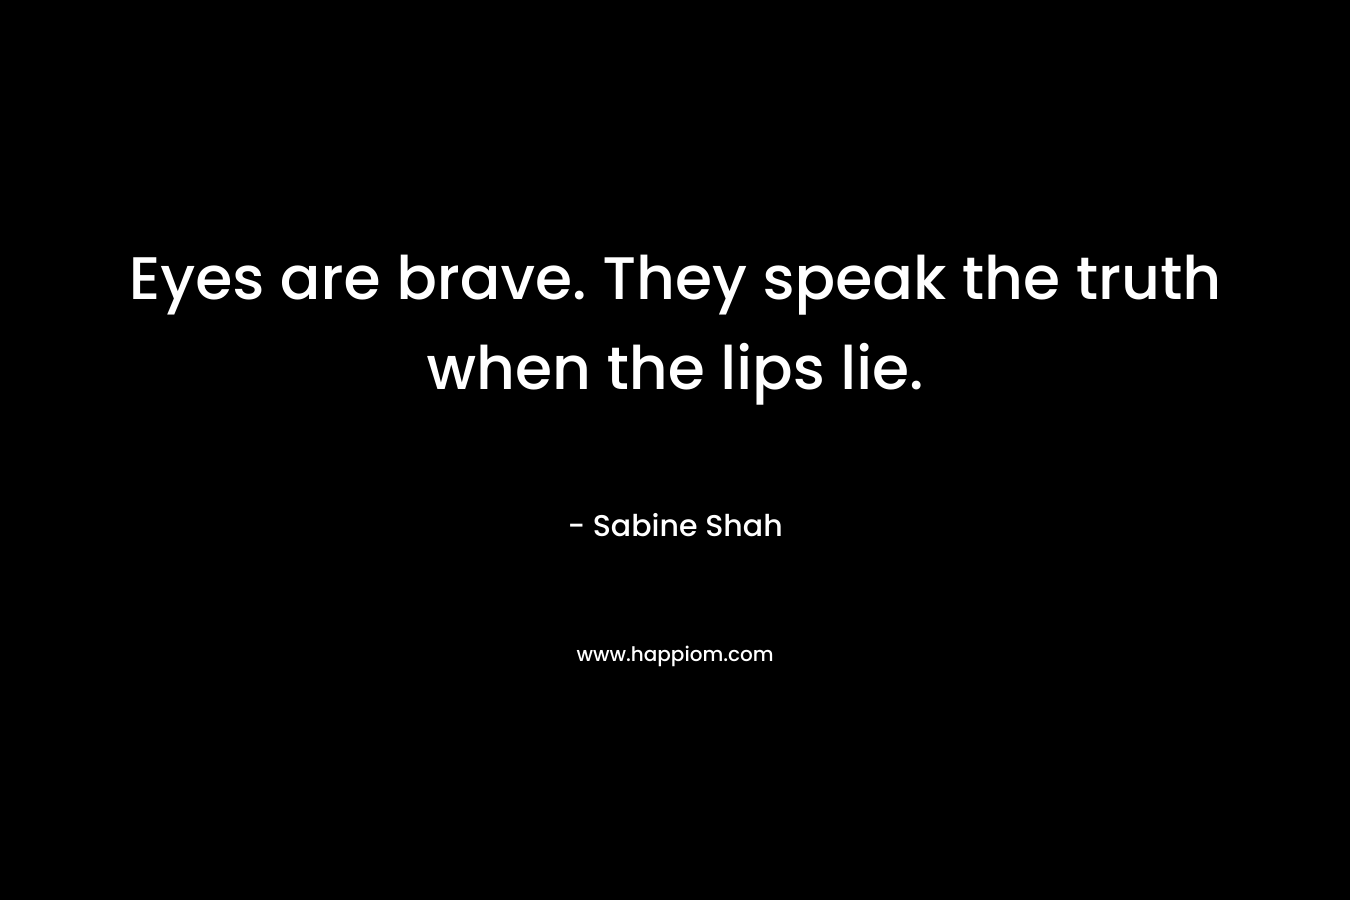 Eyes are brave. They speak the truth when the lips lie. – Sabine Shah